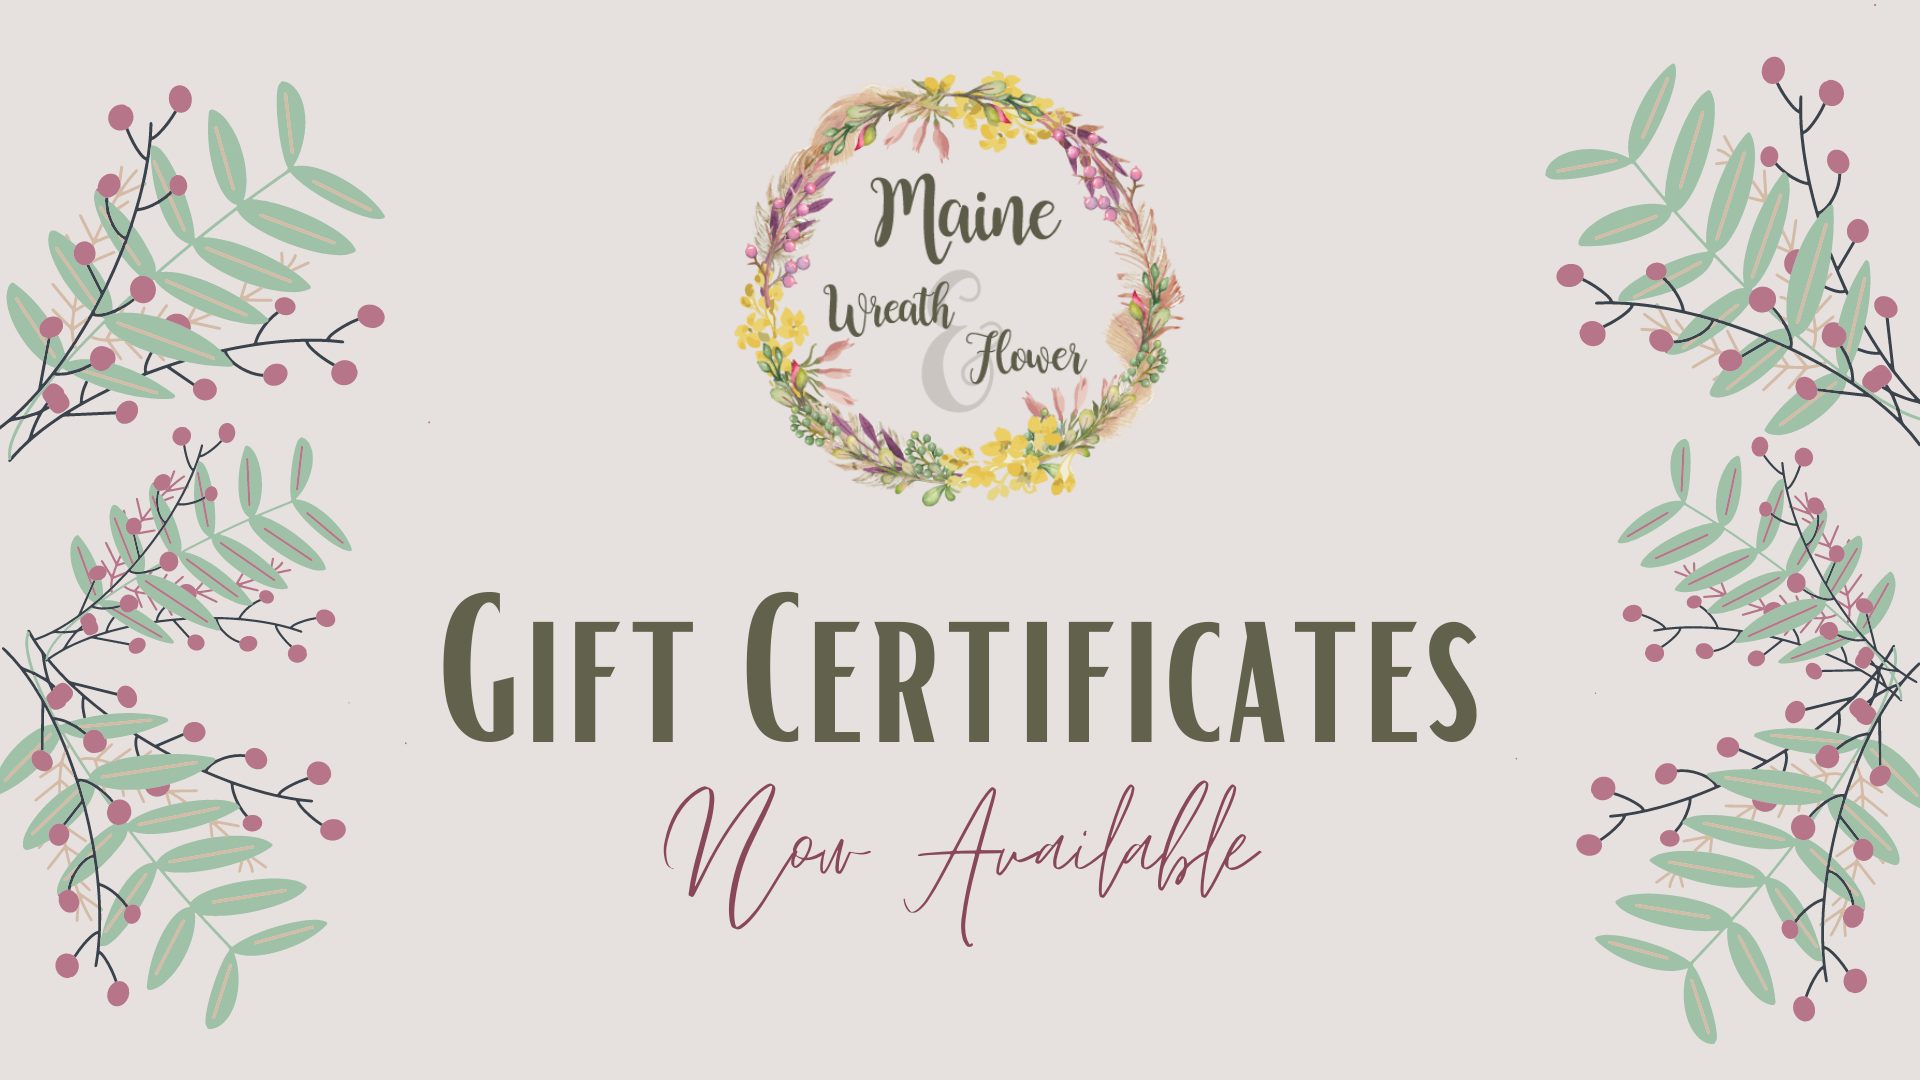 New Gift Certificates available